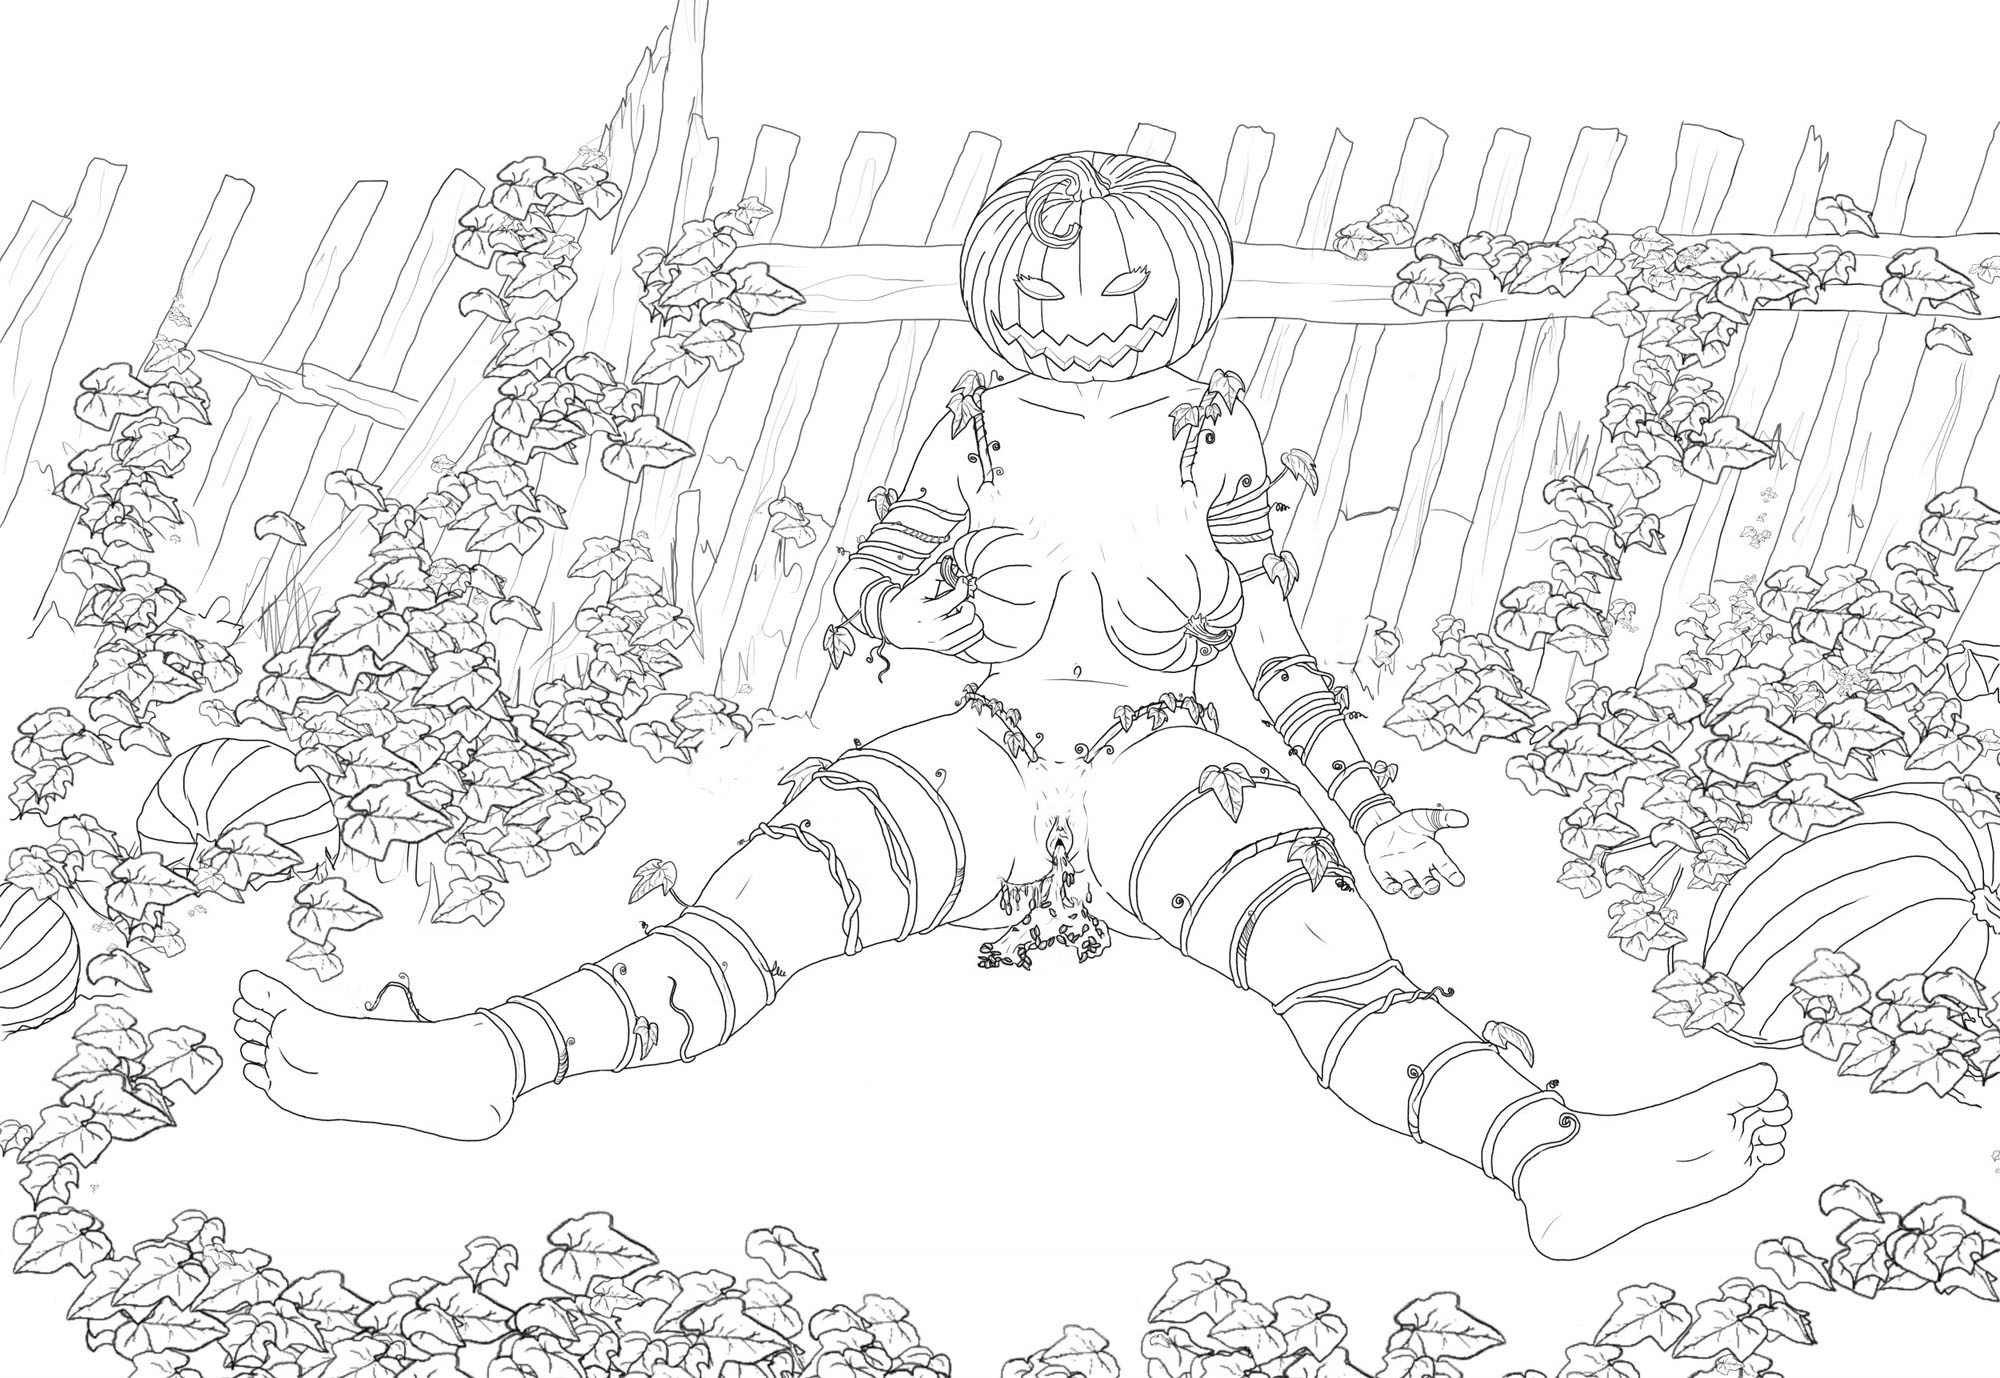 Drawing, finished transformation. Naked woman with a smiling, feminine jack-o-lantern head propped against a broken wooden fence. Pumpkin vines growing from her skin wrap her arms and legs like puppet strings. Her breasts have become half-pumpkin with stem nipples. Pumpkin seed filled pumpkin innards spill from her vagina and onto the ground.